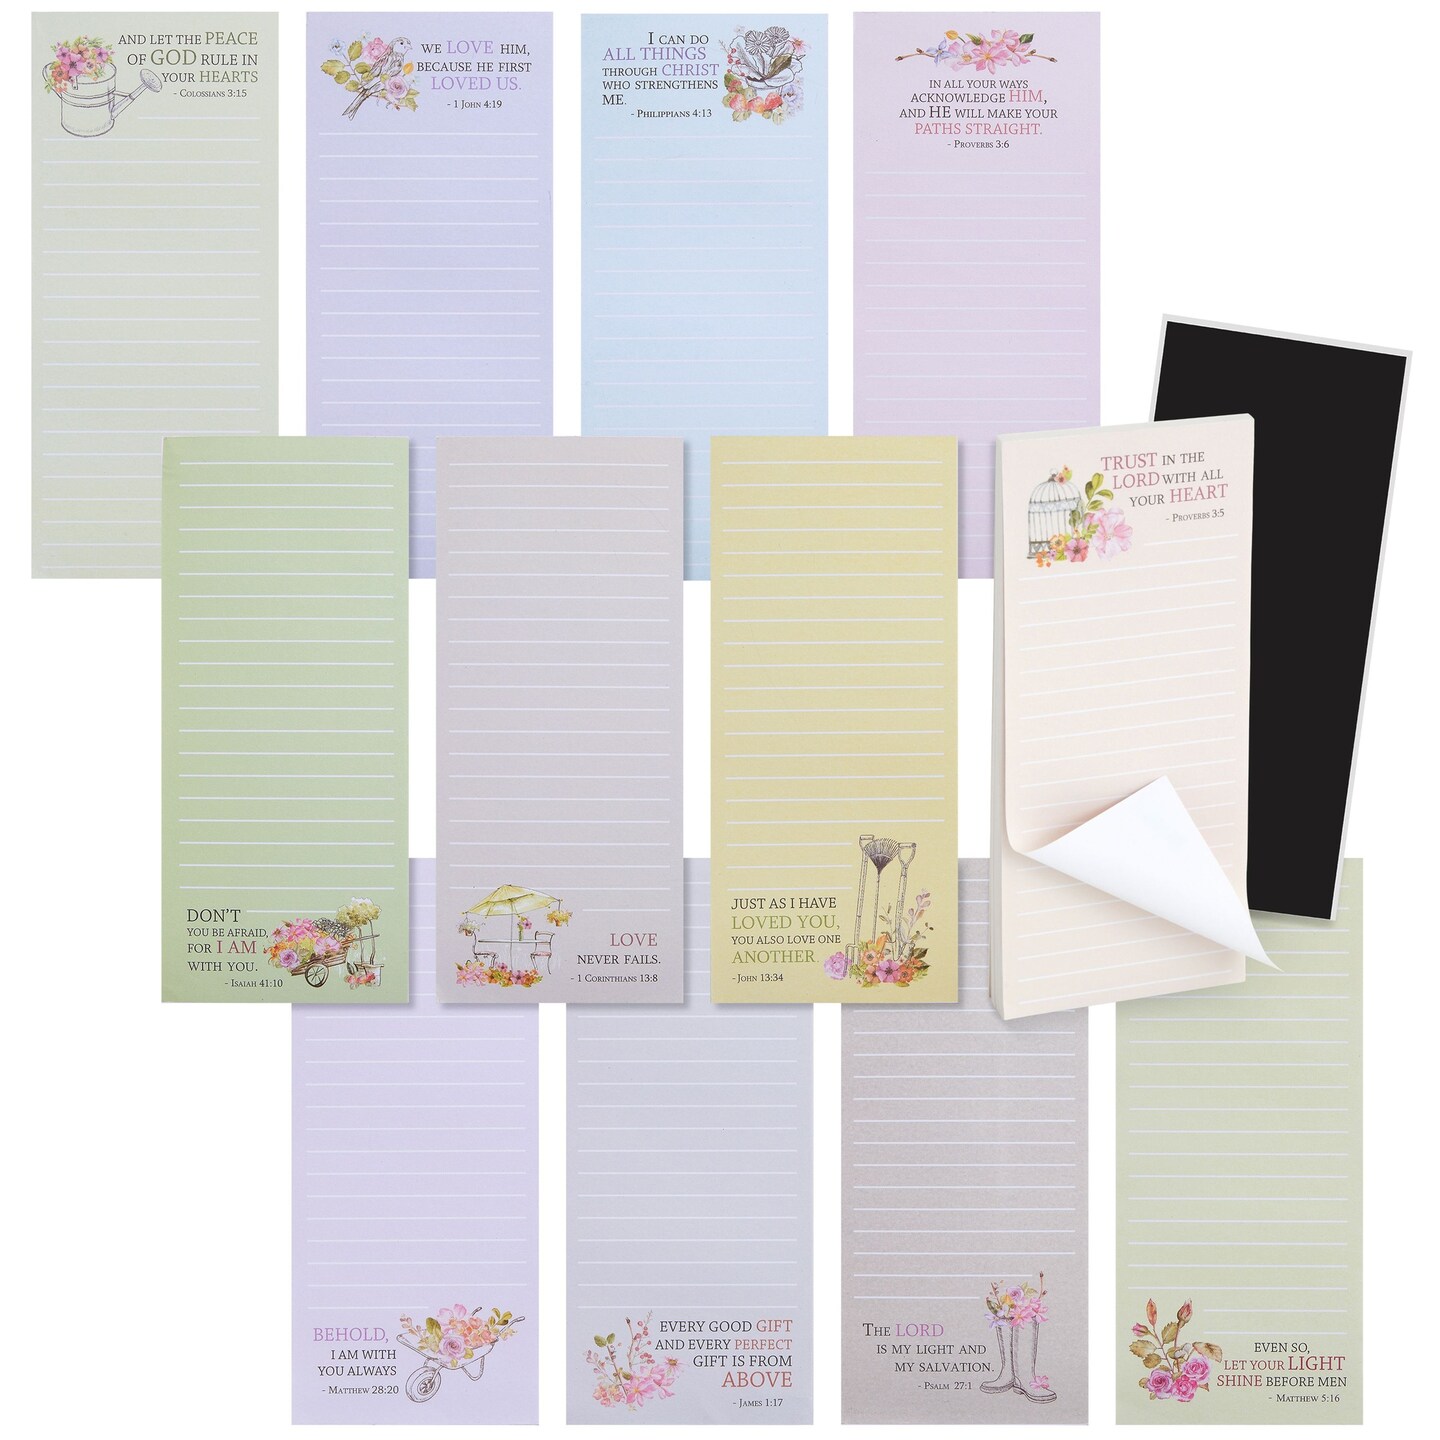 12 Pack, 60 Sheet Christian Notepads, Magnetic Memo Pads for Refrigerator, Religious Stationery, Bible Verse Note pads for Prayer, Grocery and Shopping List, 2.75x6.25 inch